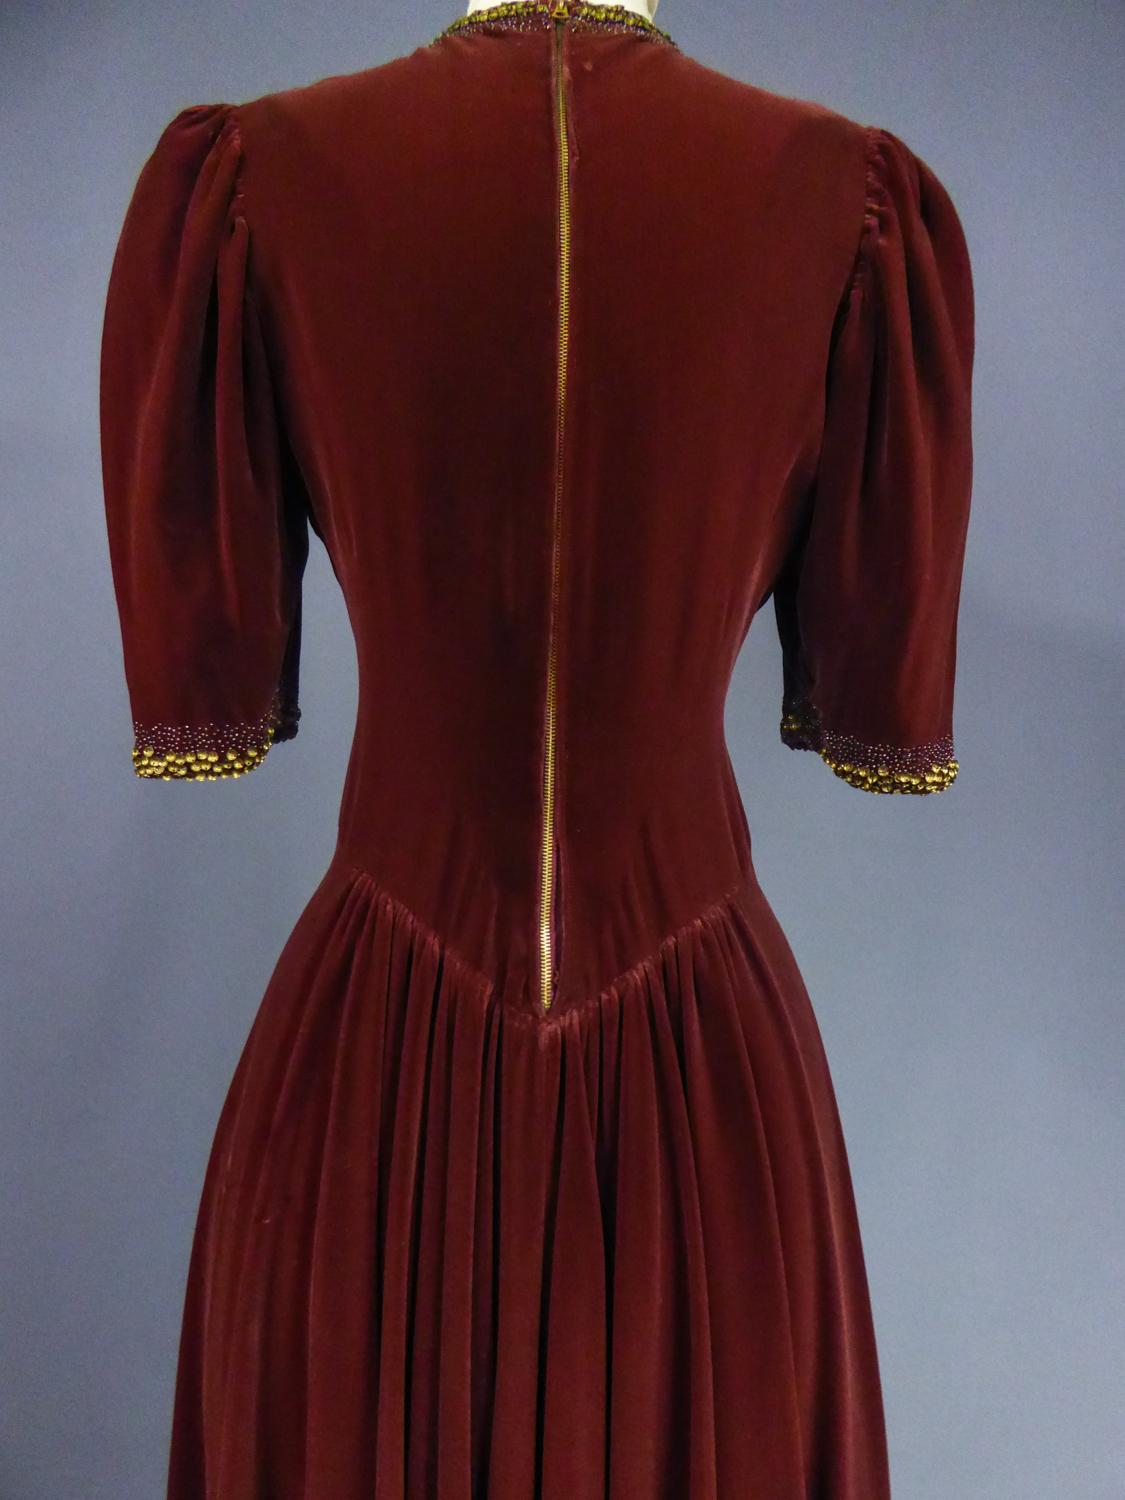 A French Couture Beaded Chocolate Velvet Dress Circa 1940-1950 For Sale 2